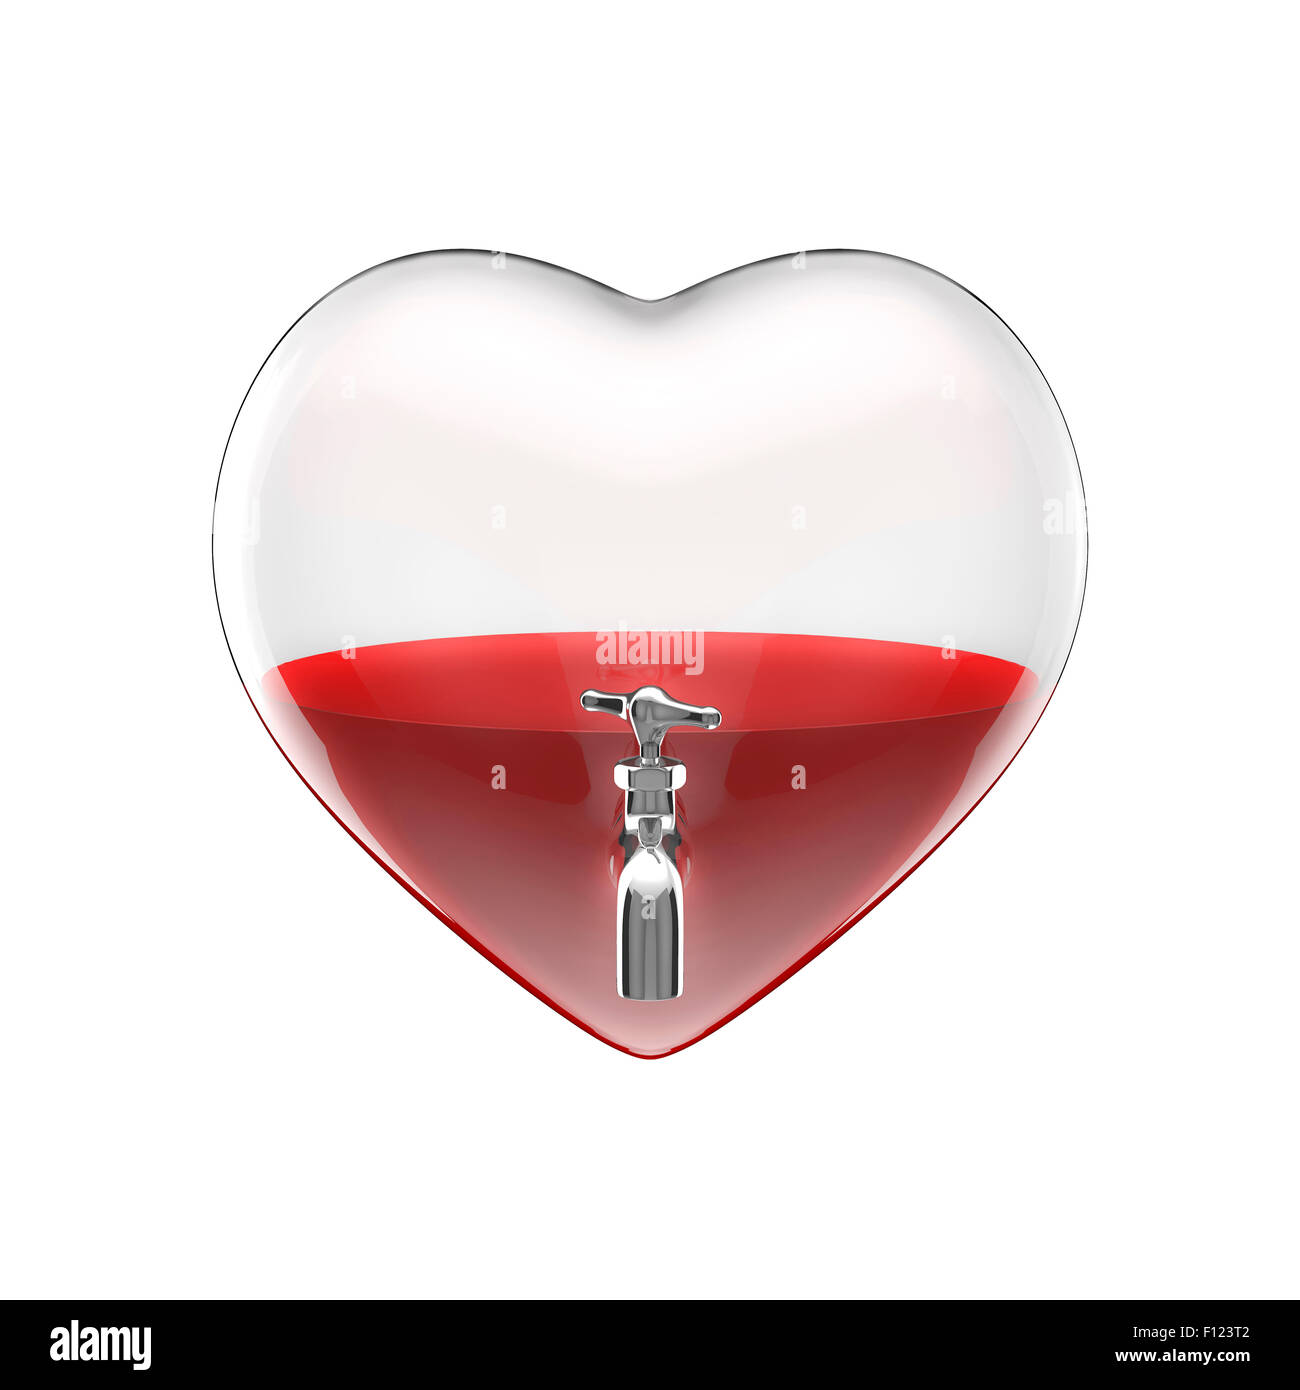 Filled heart, 3D render of heart with tap half filled with red liquid Stock Photo